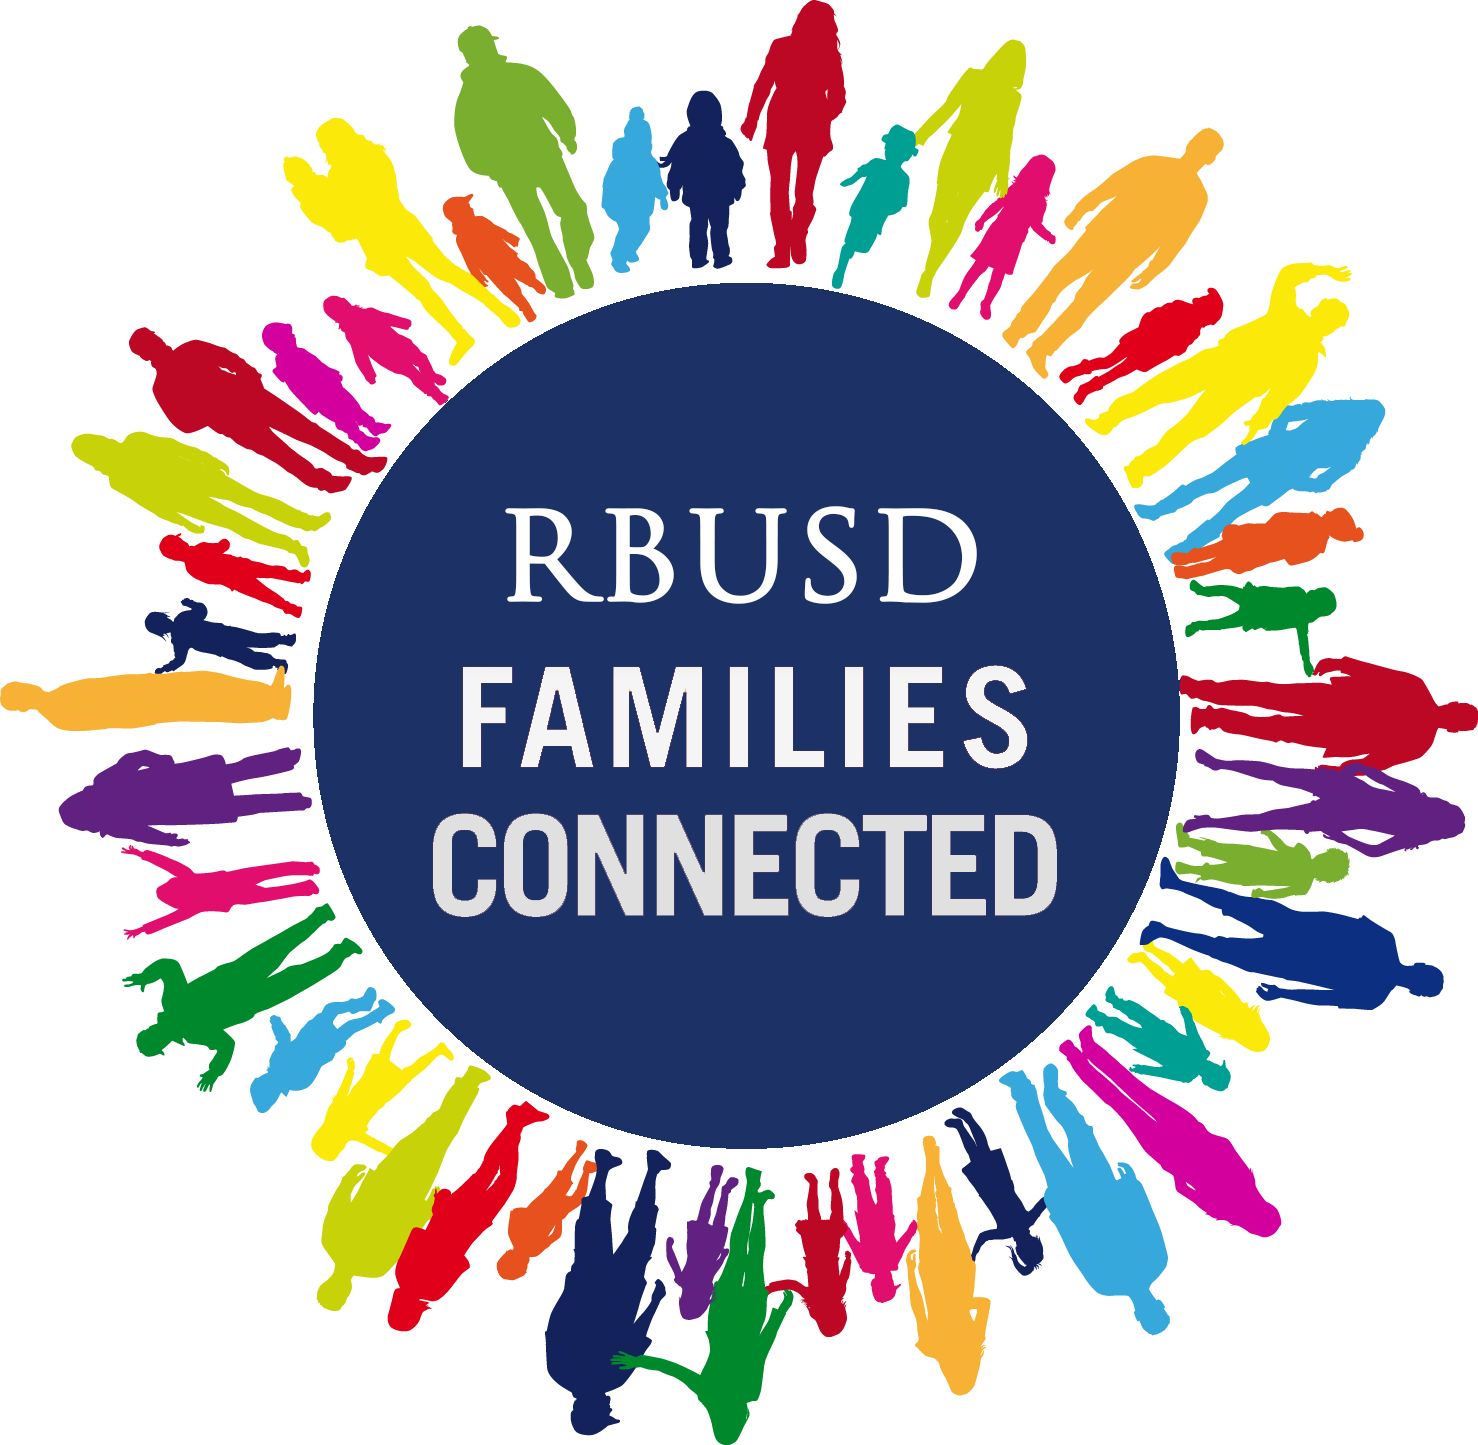 RBUSD Families Connected